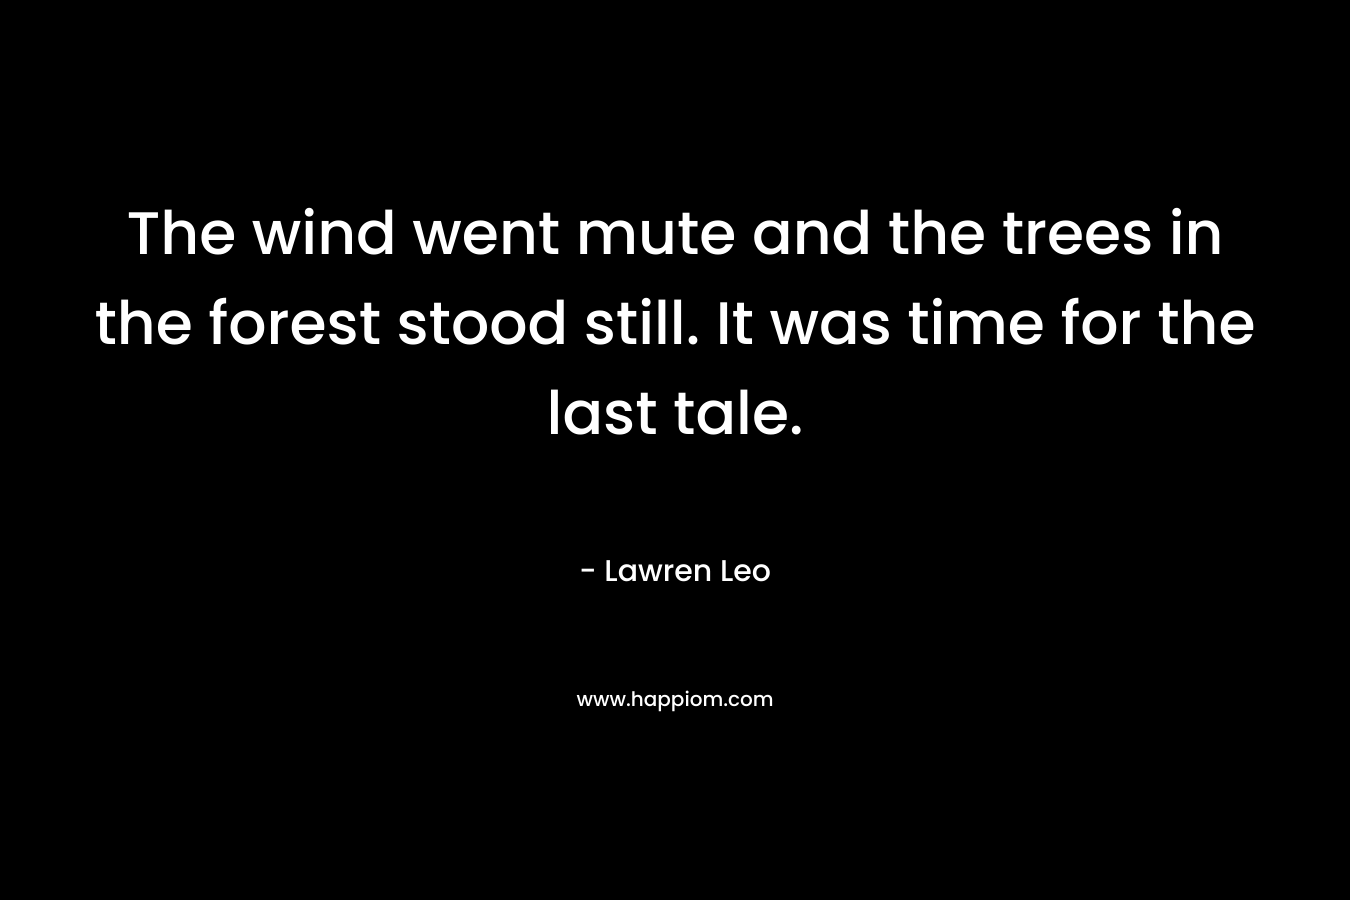 The wind went mute and the trees in the forest stood still. It was time for the last tale.